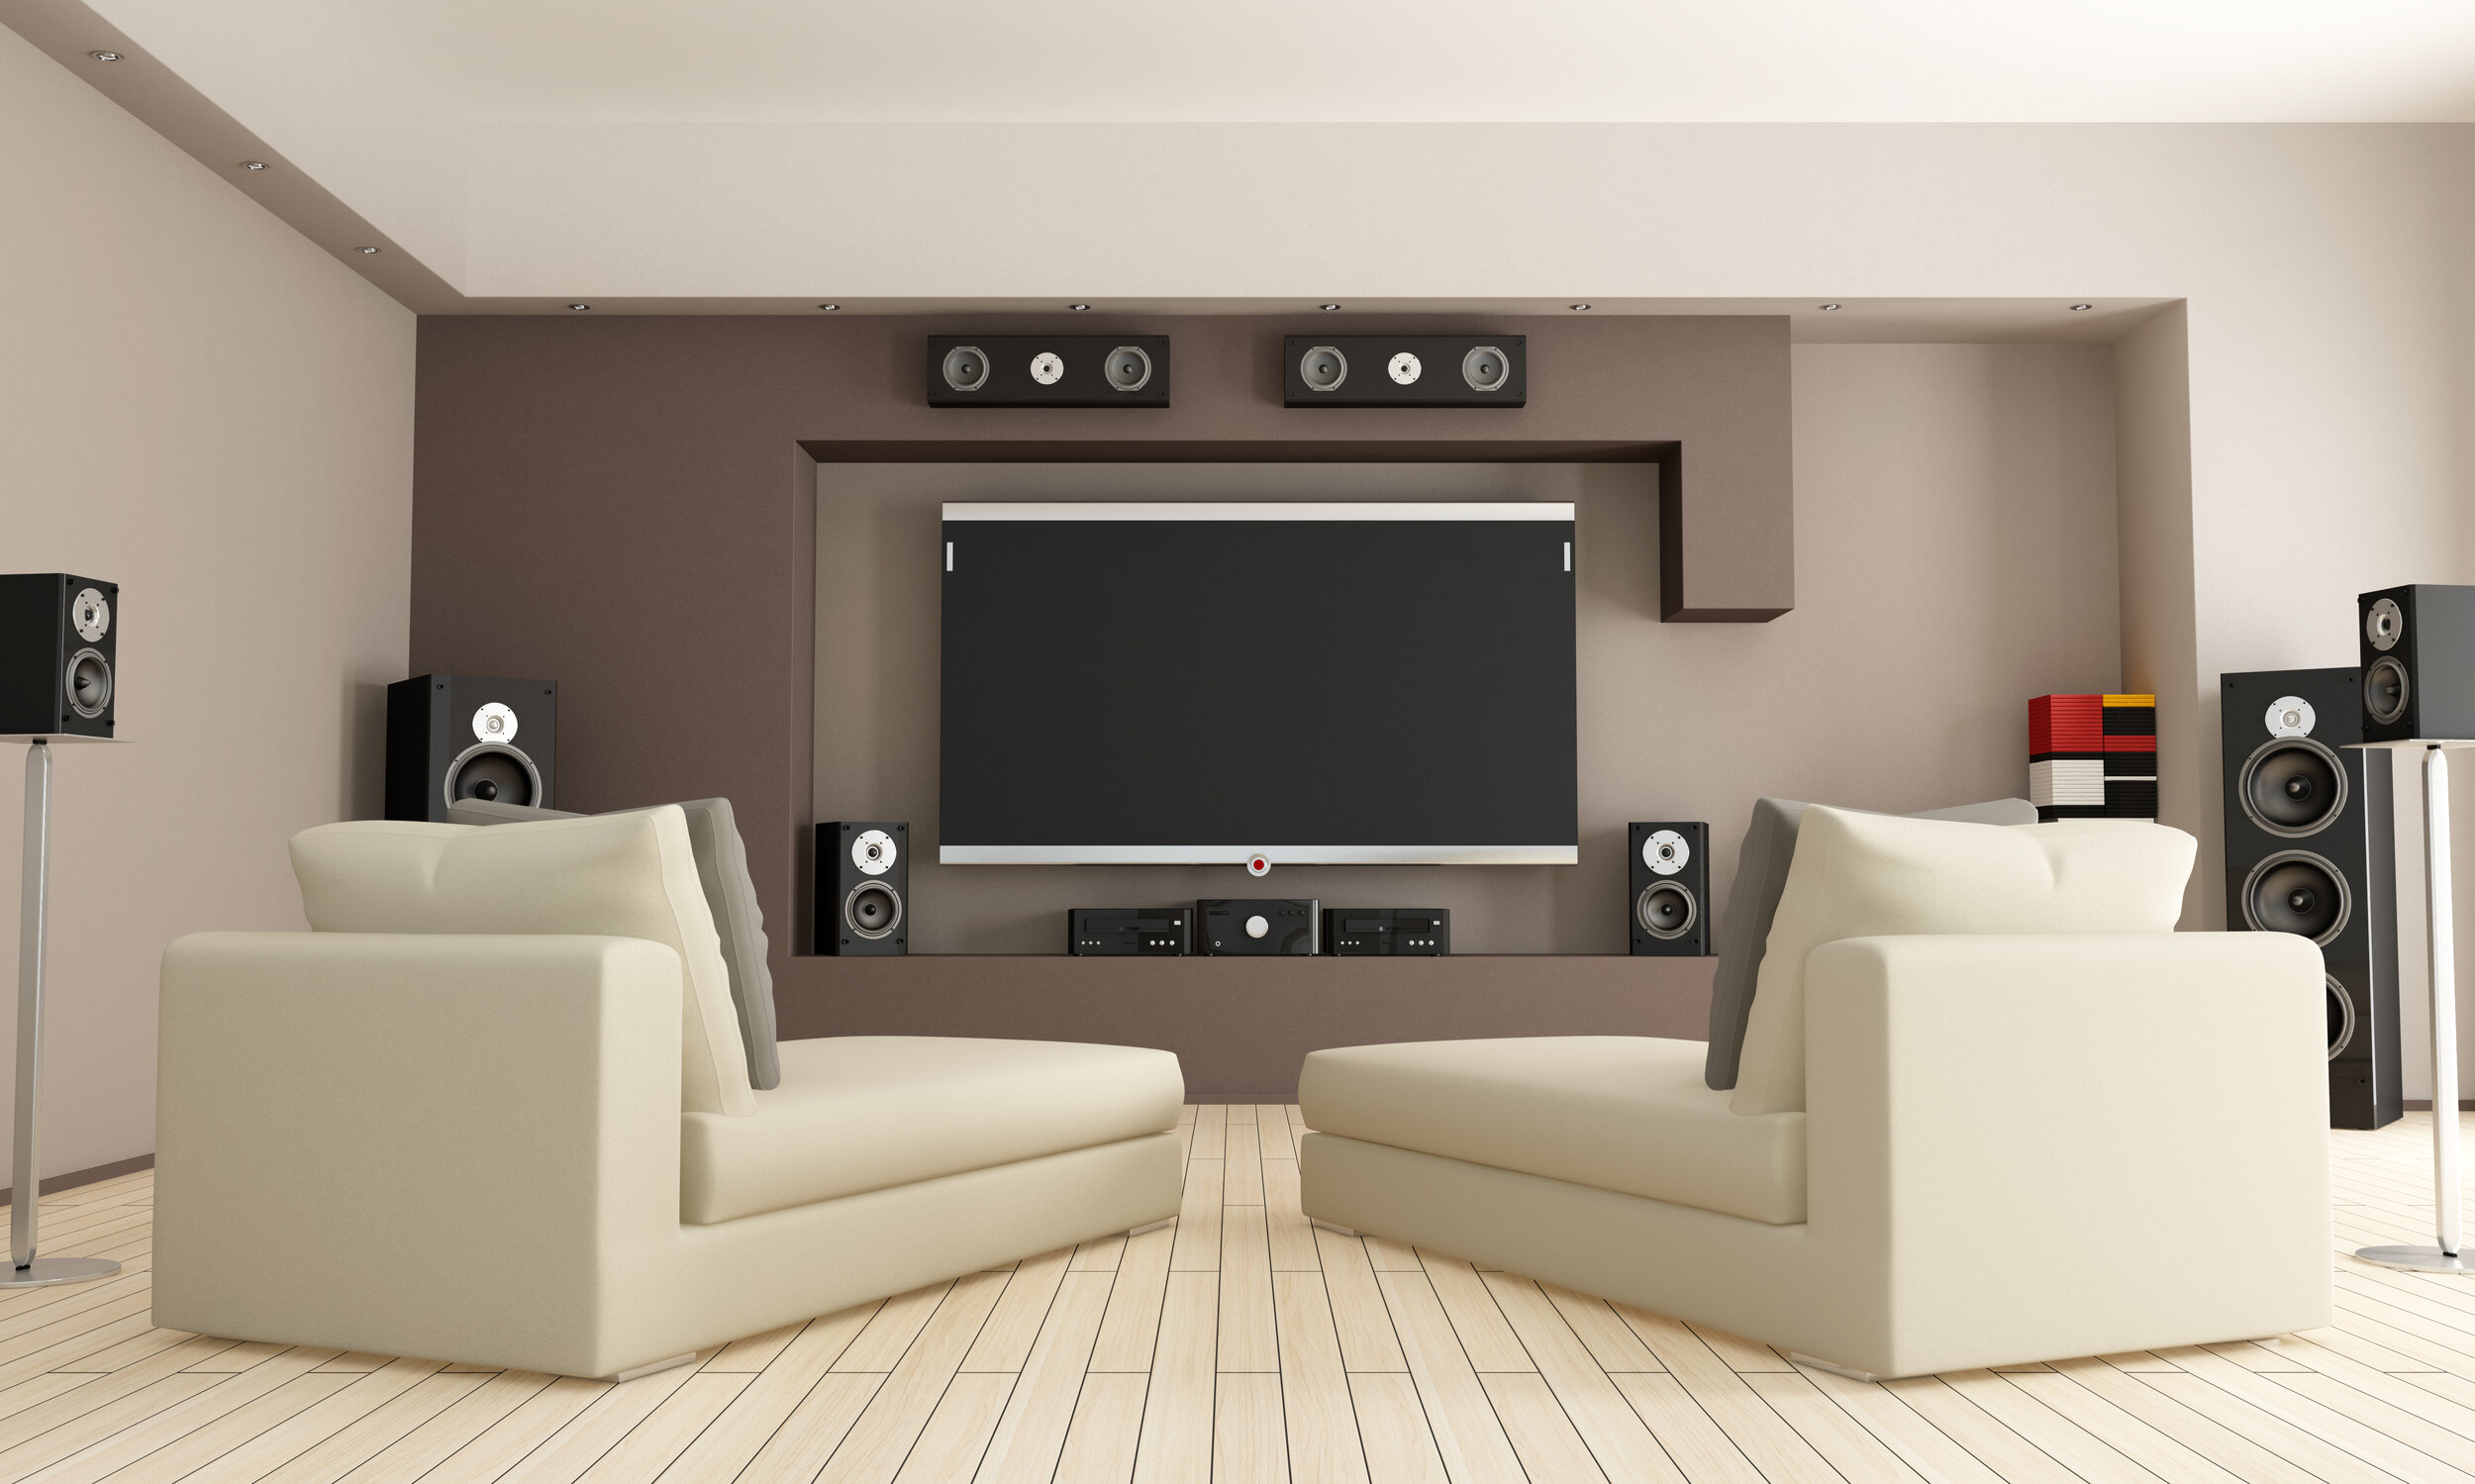 Residential and Home Theater Acoustics